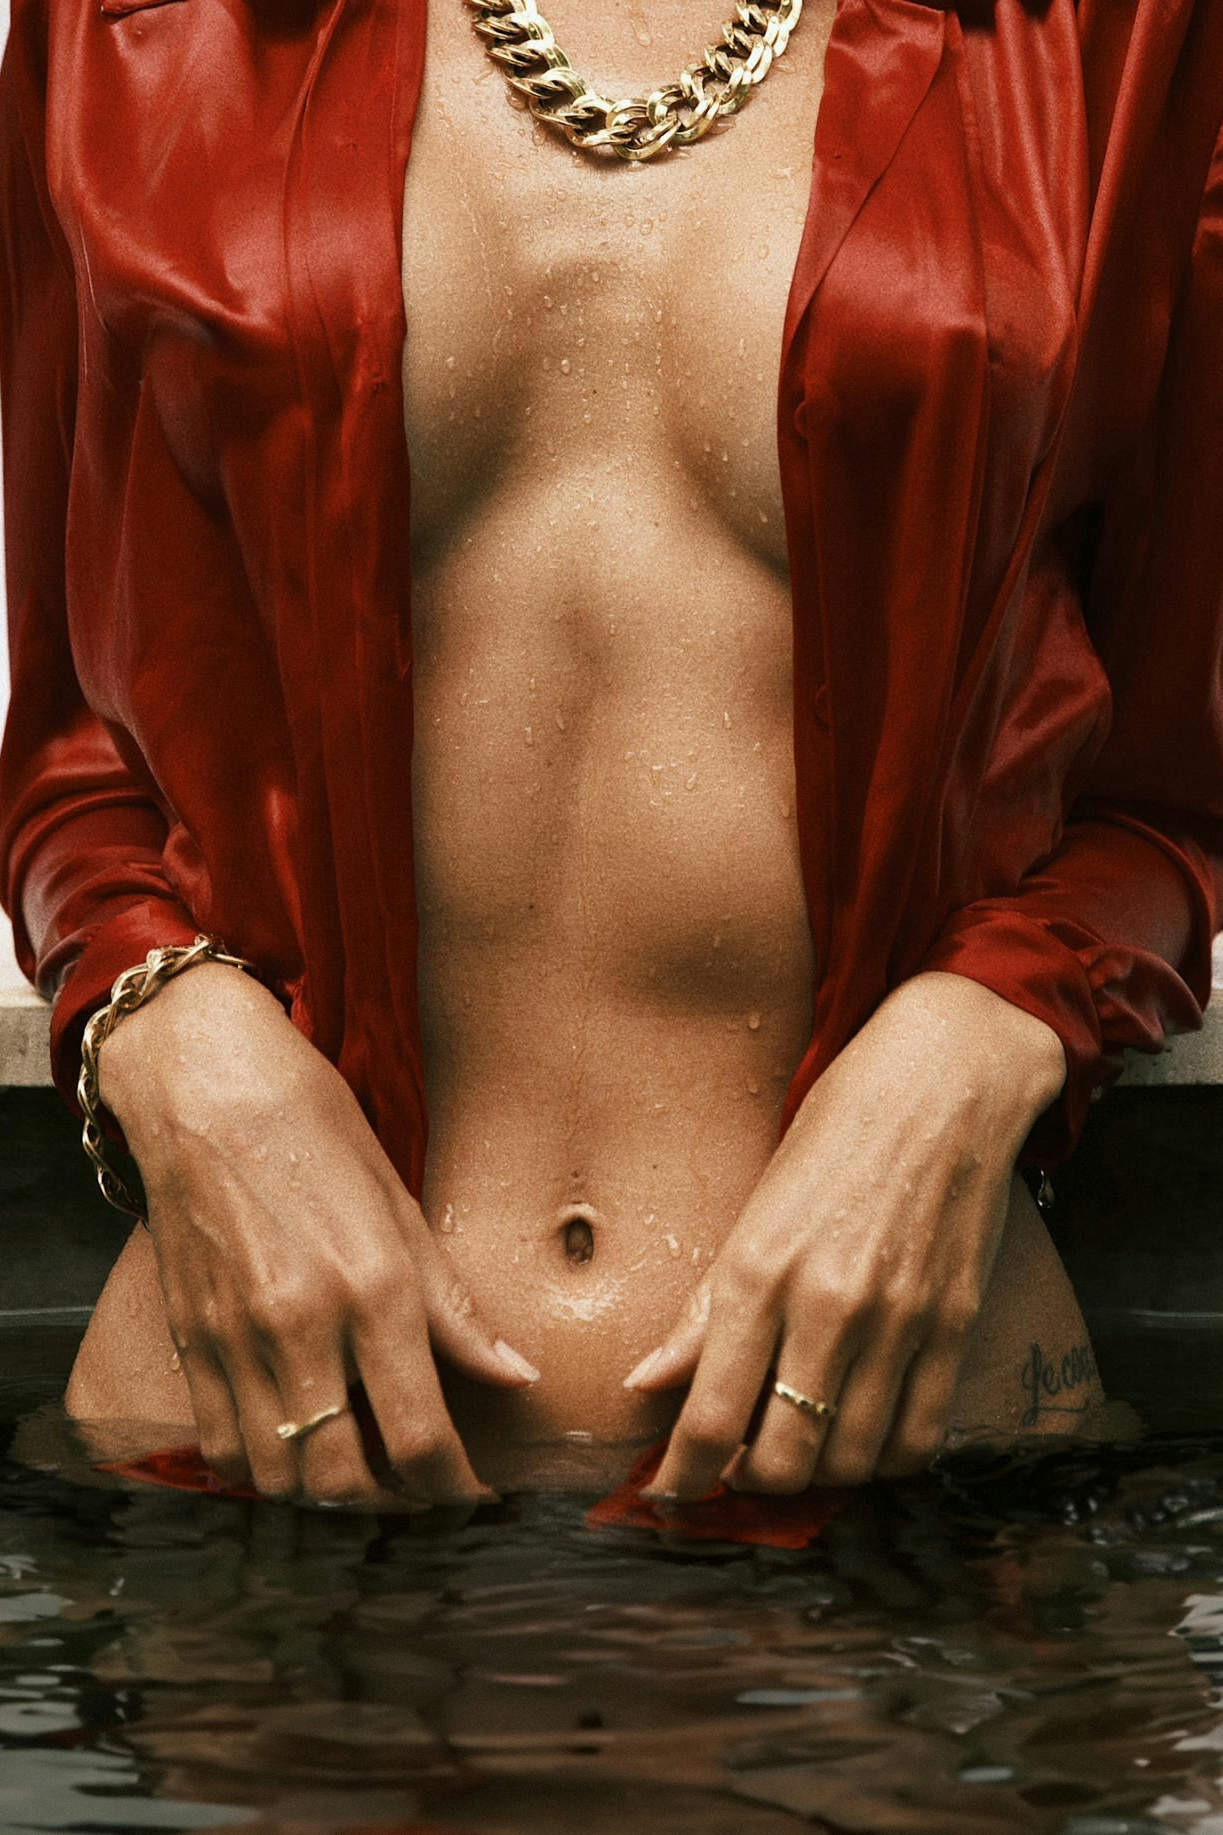 A naked woman in a red robe stands in the water. She is wearing gold and silver
jewelry, including bracelets on her wrists